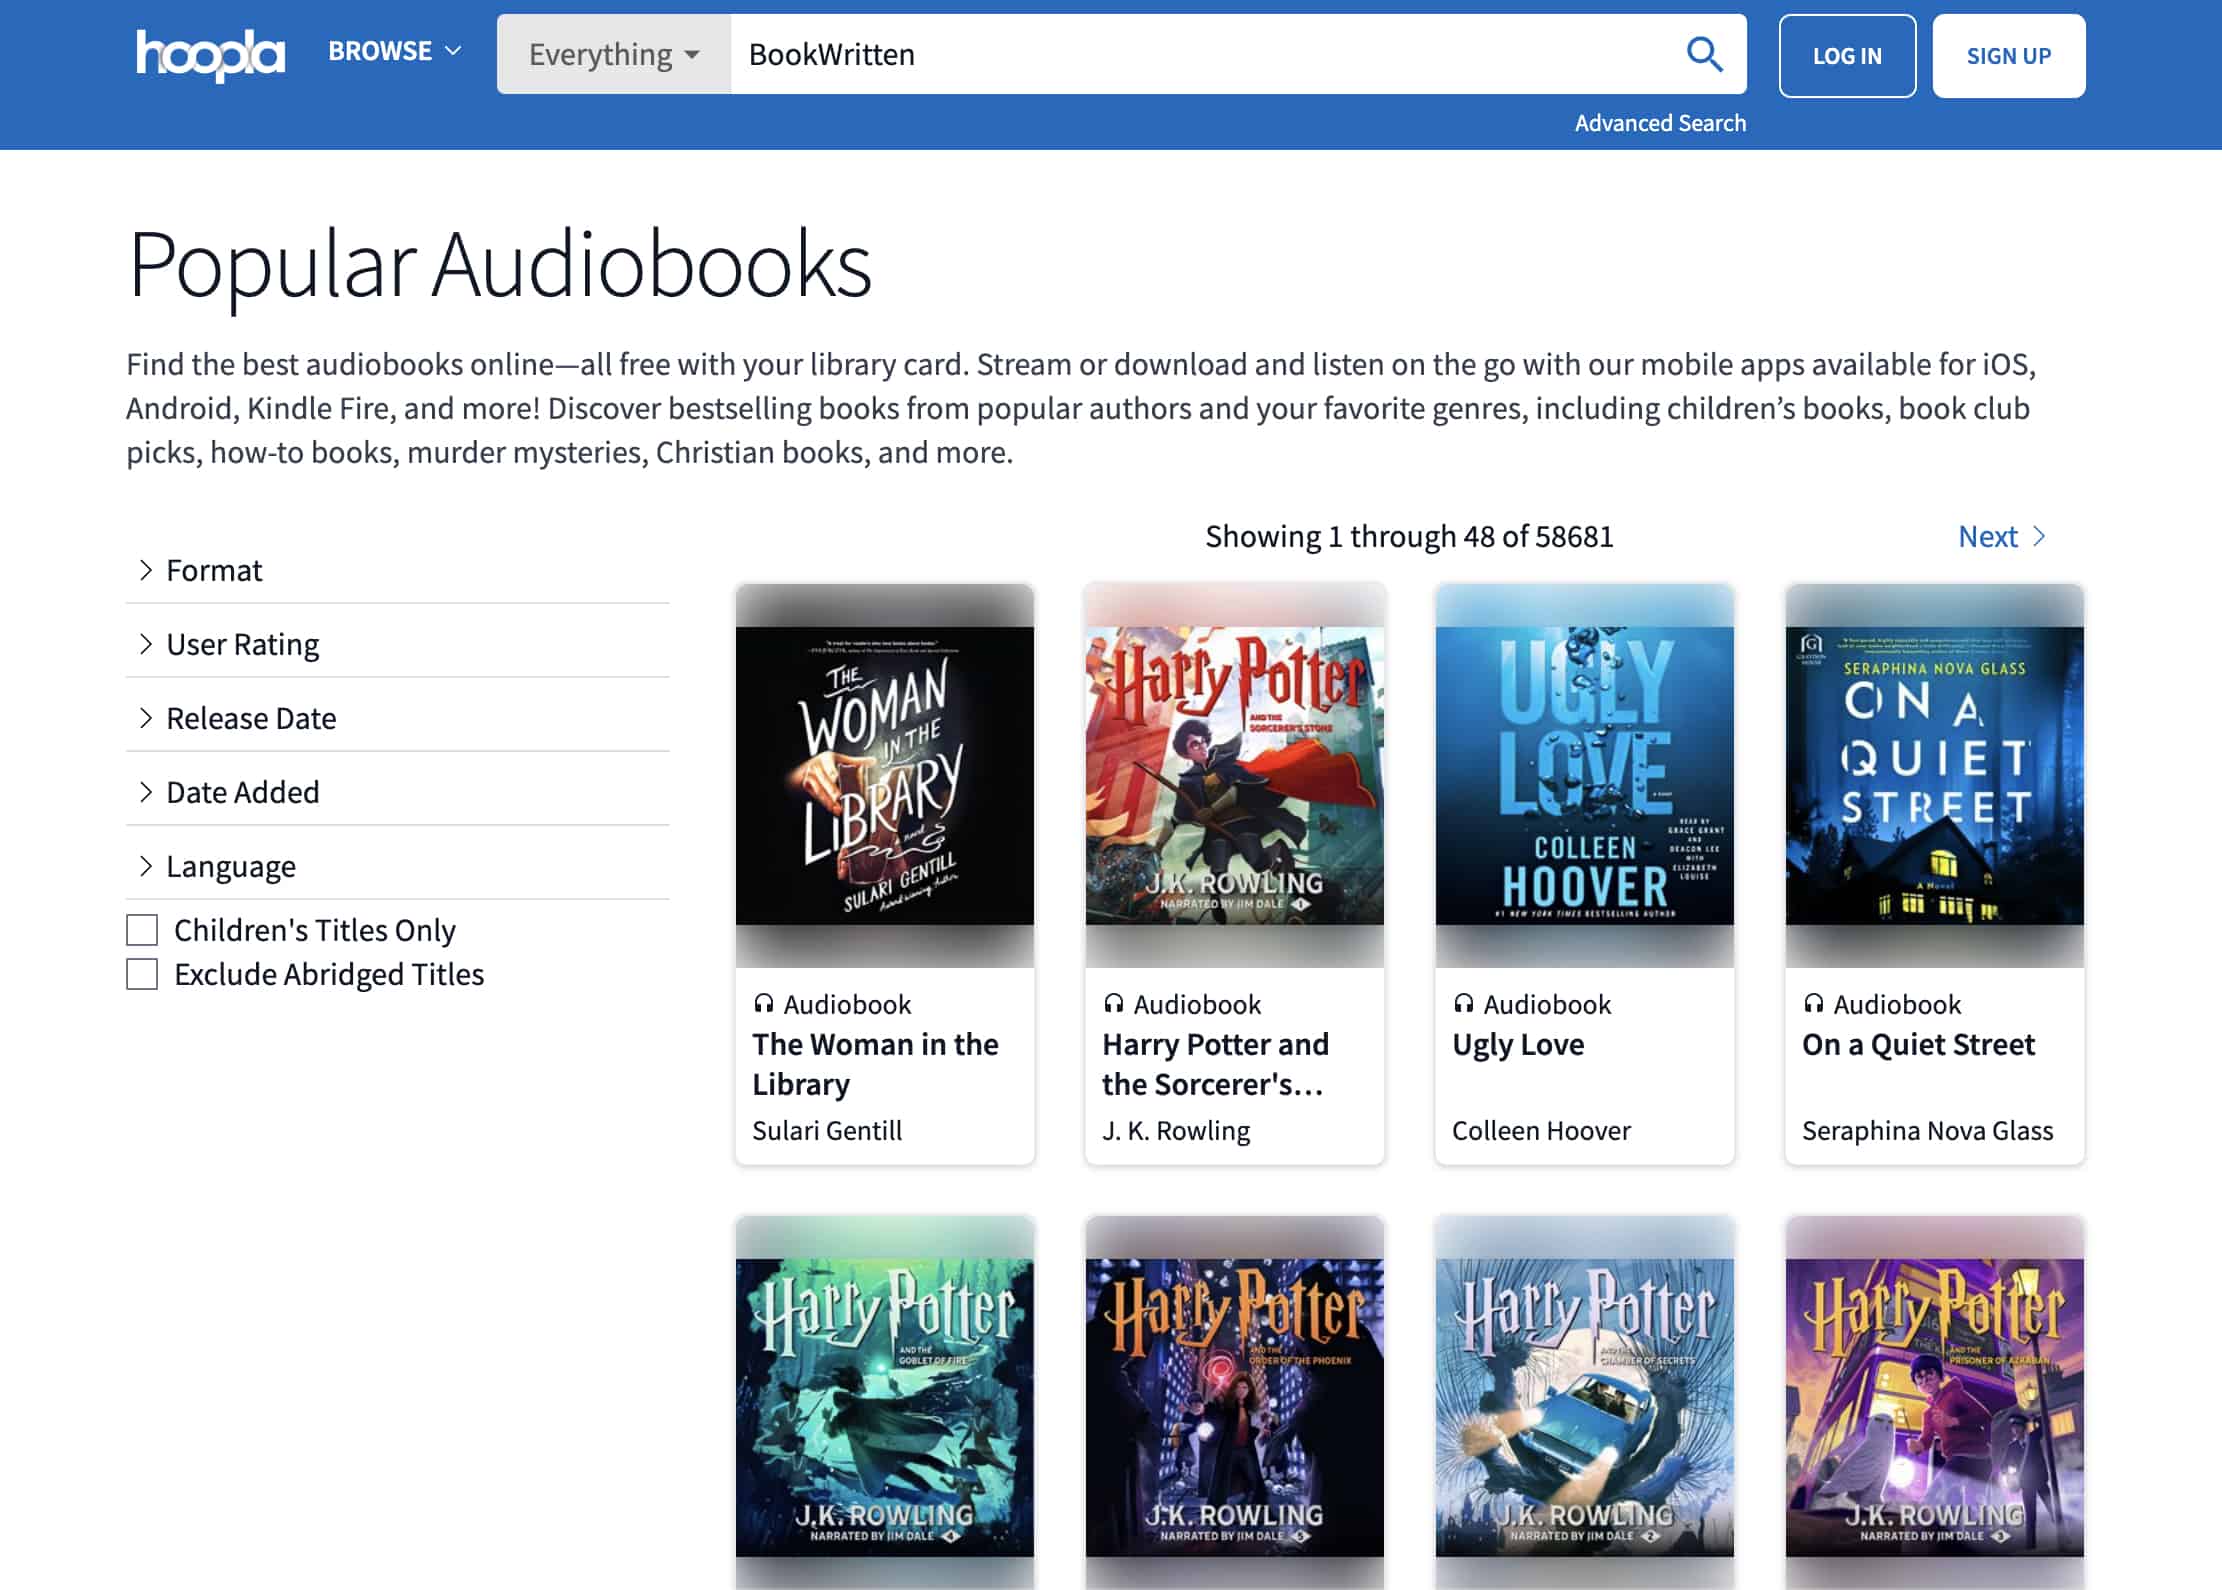 What Are the Best Platforms for Free Audiobooks on Poetry and Literature?